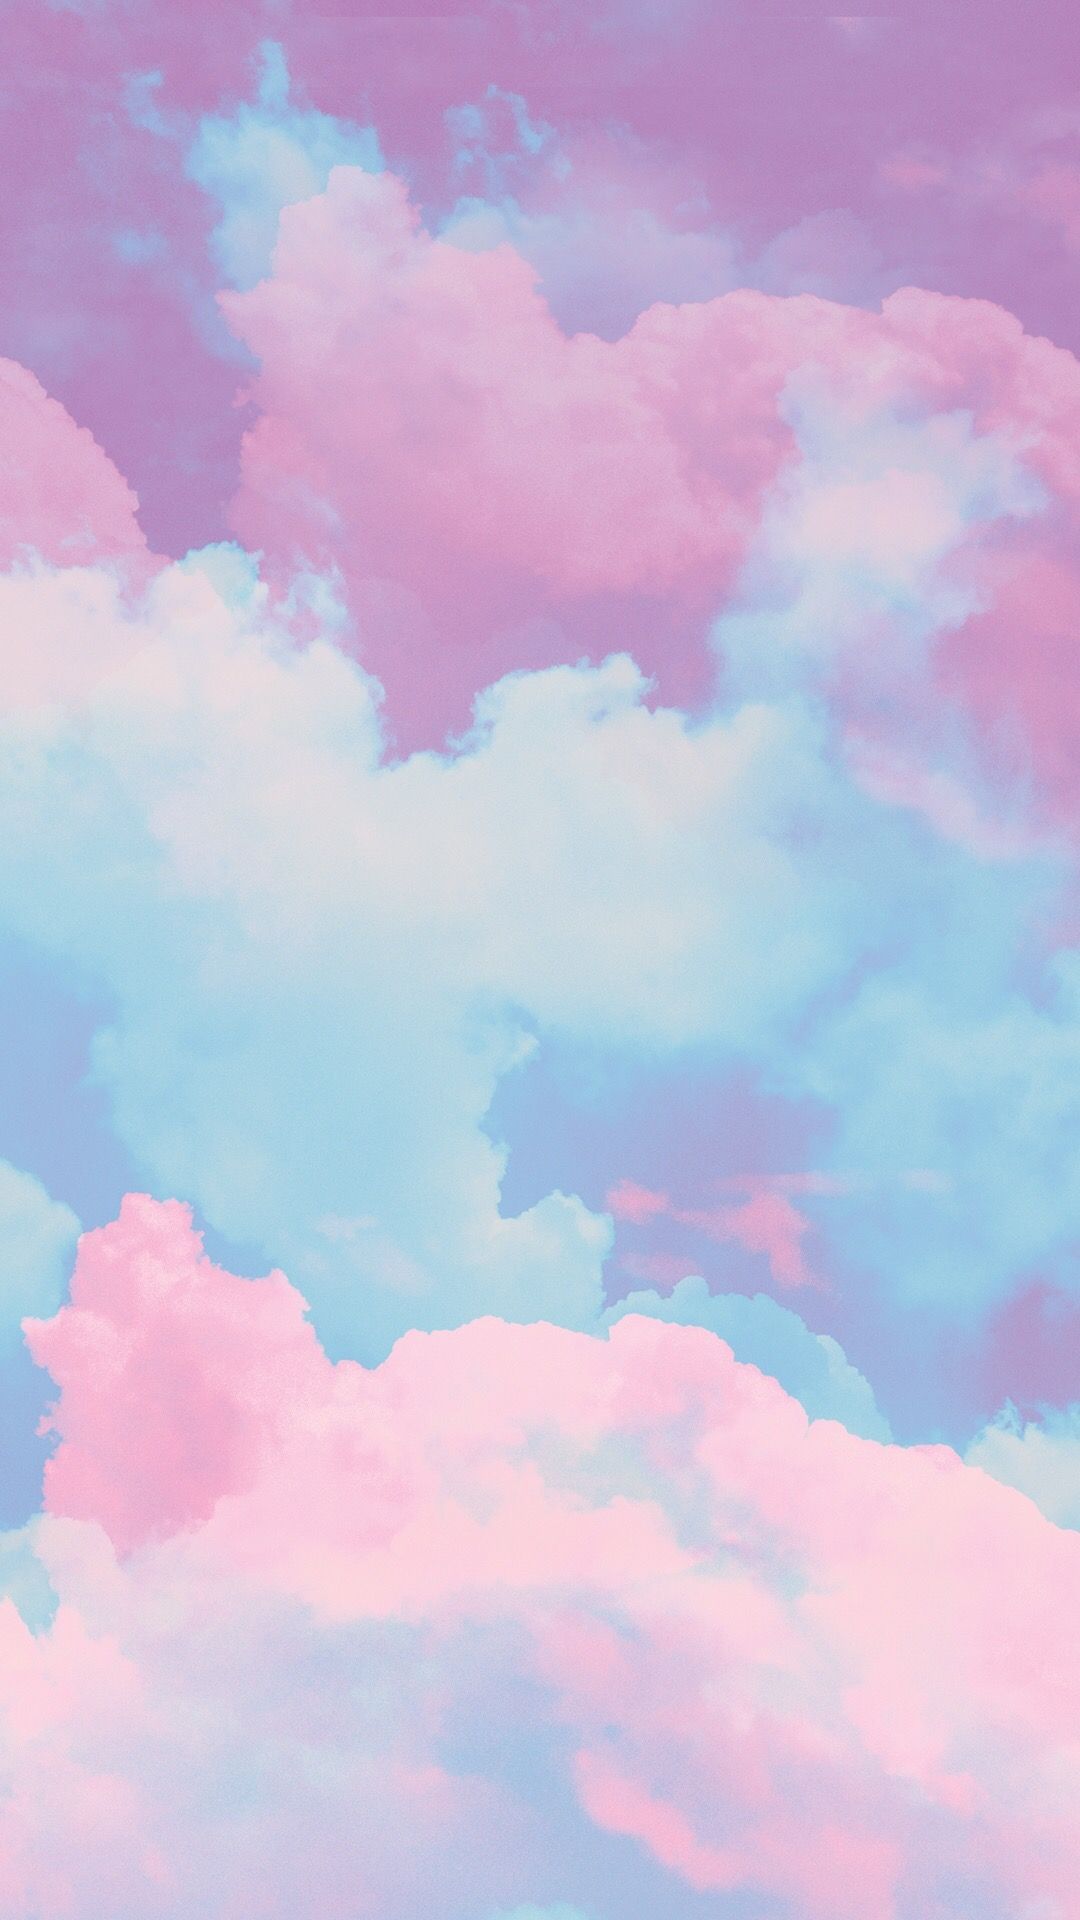 Pastel Colors Aesthetic Blue And Pink Wallpapers - Wallpaper Cave